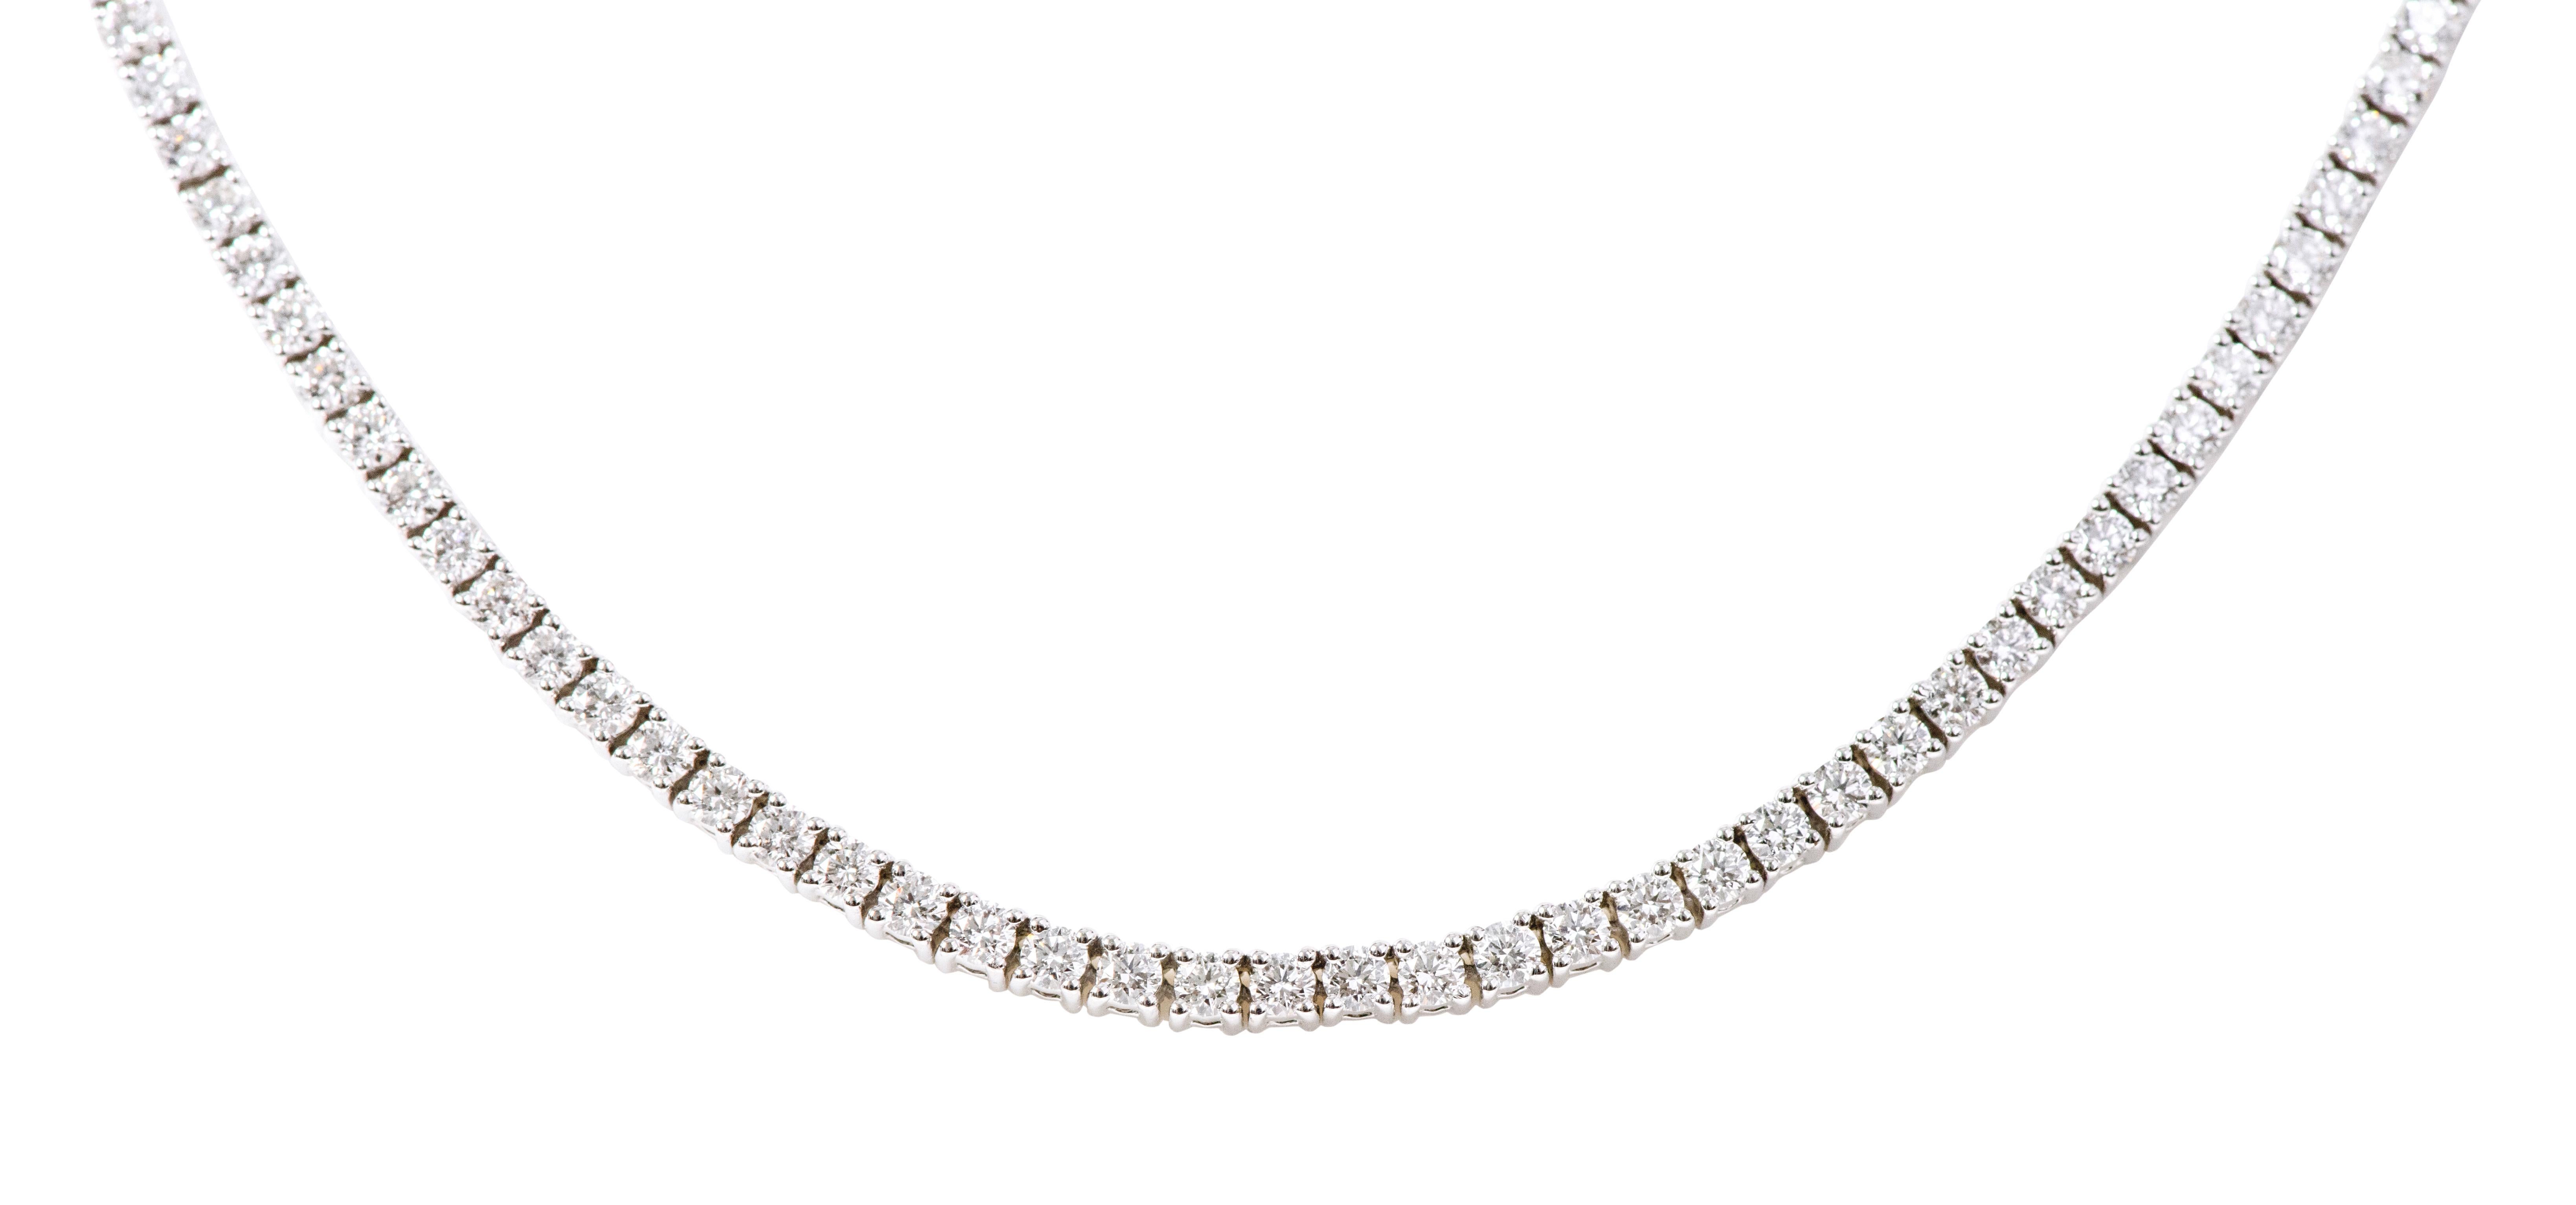 18 Karat White Gold 5.35 Carat Brilliant-Cut Diamond Tennis Necklace

This elegant diamond solitaire tennis necklace is eternal. The diamond tennis necklace with brilliant cut round solitaire diamonds of 5 pointers each with the perfect cut and